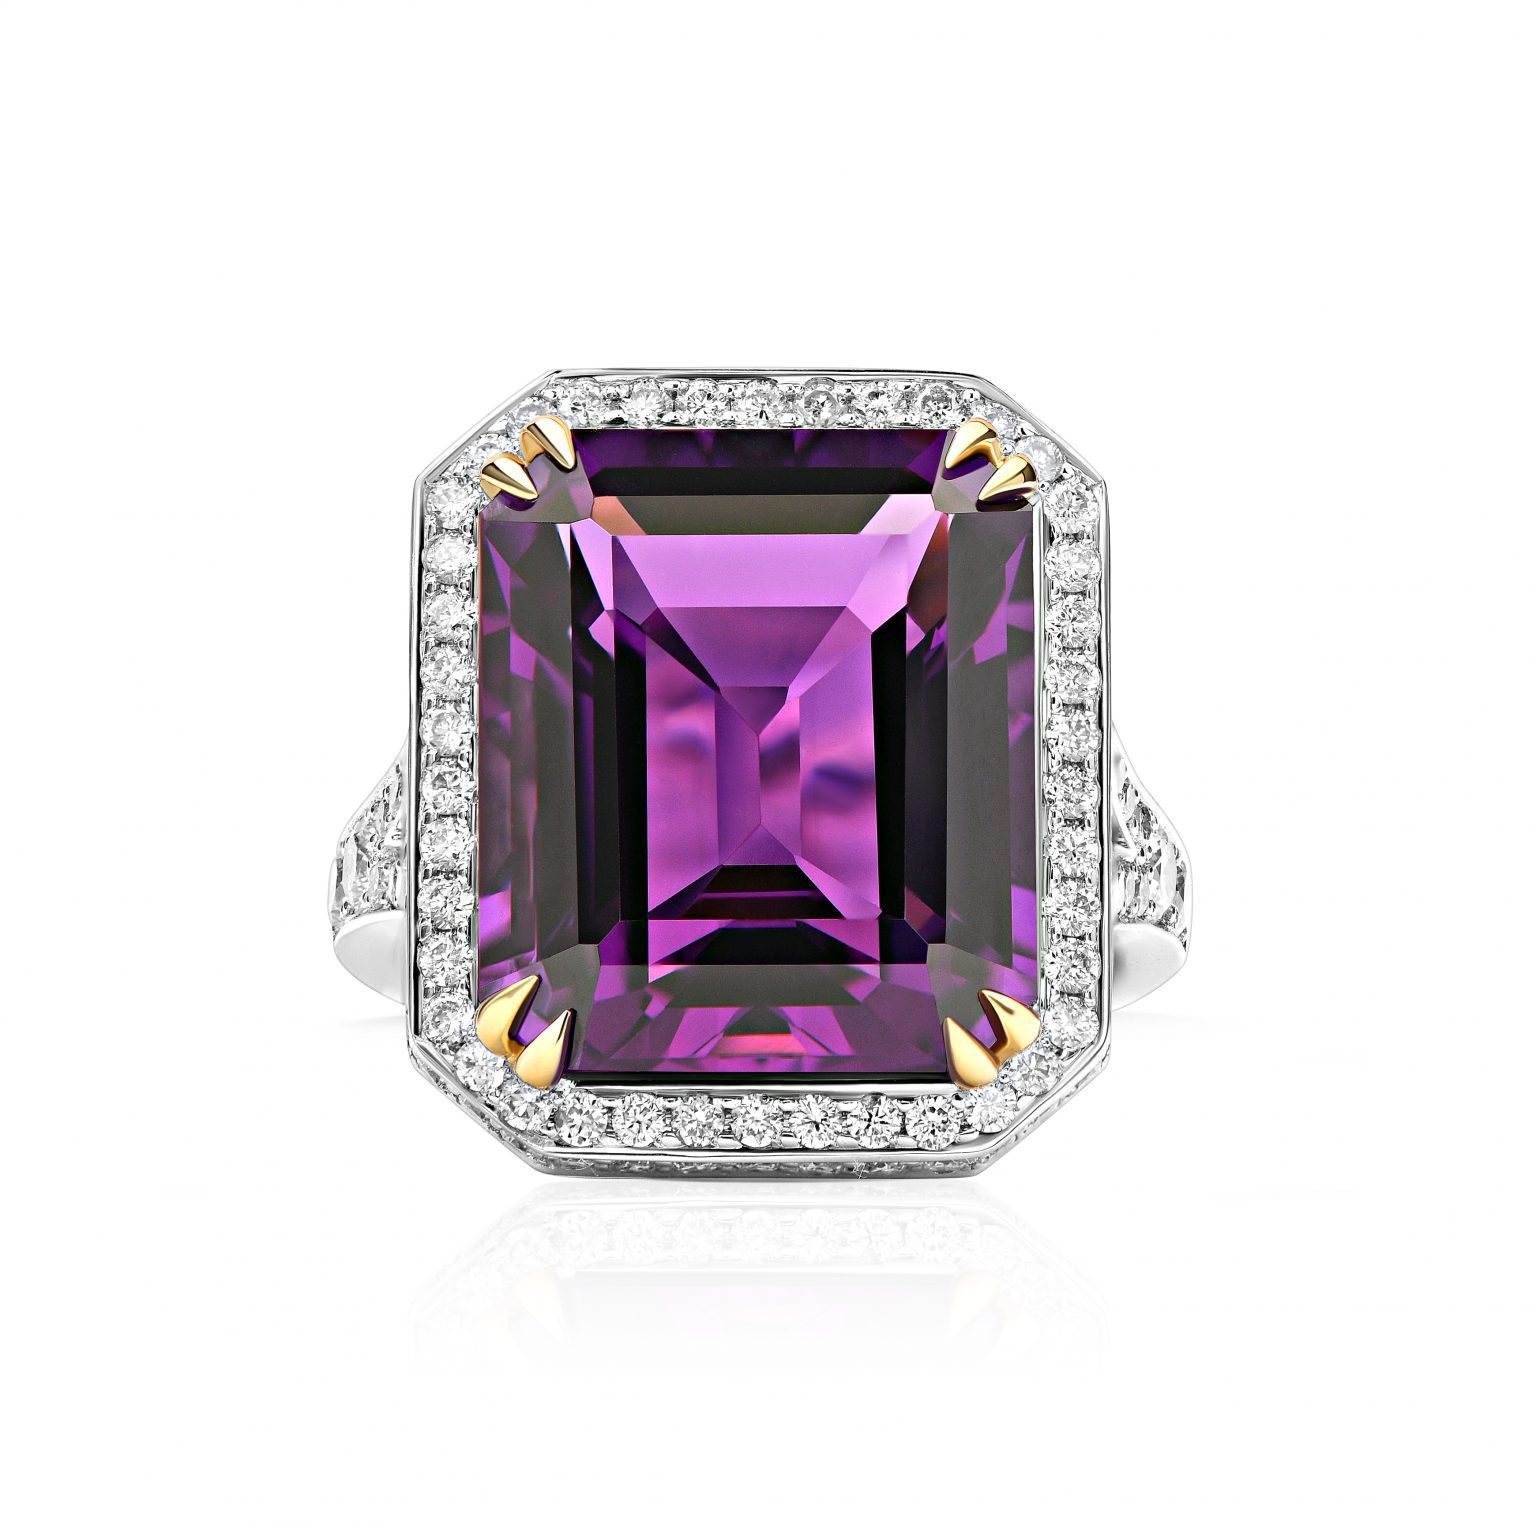 10.98 ct White Gold Spinel Amethyst Ring